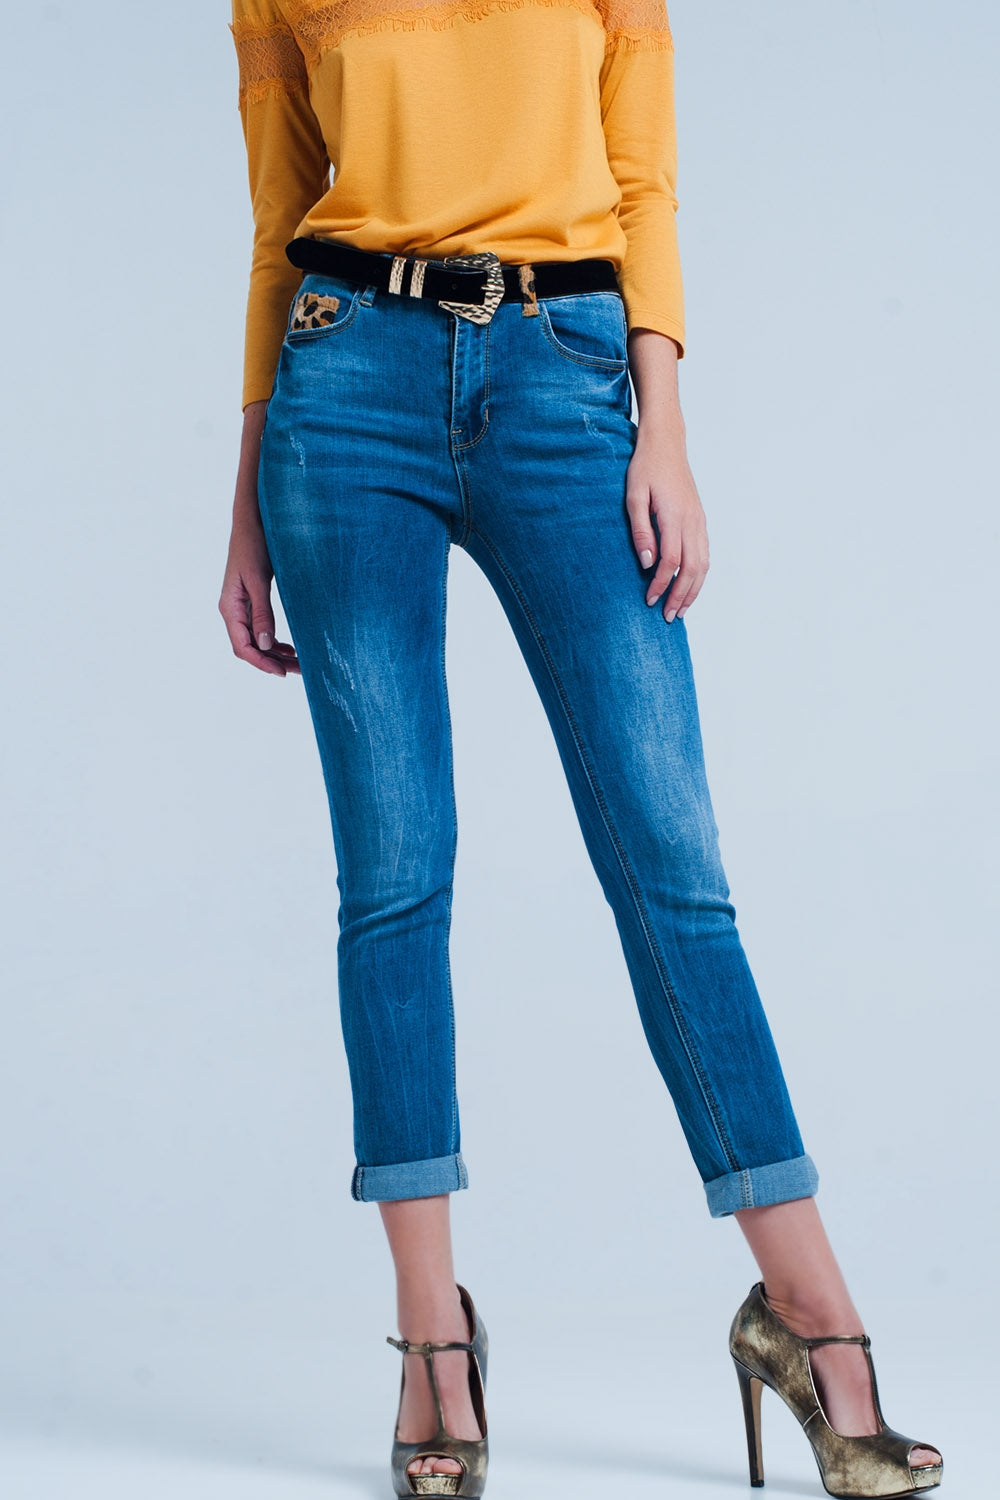 Q2 skinny jeans with leopard detail